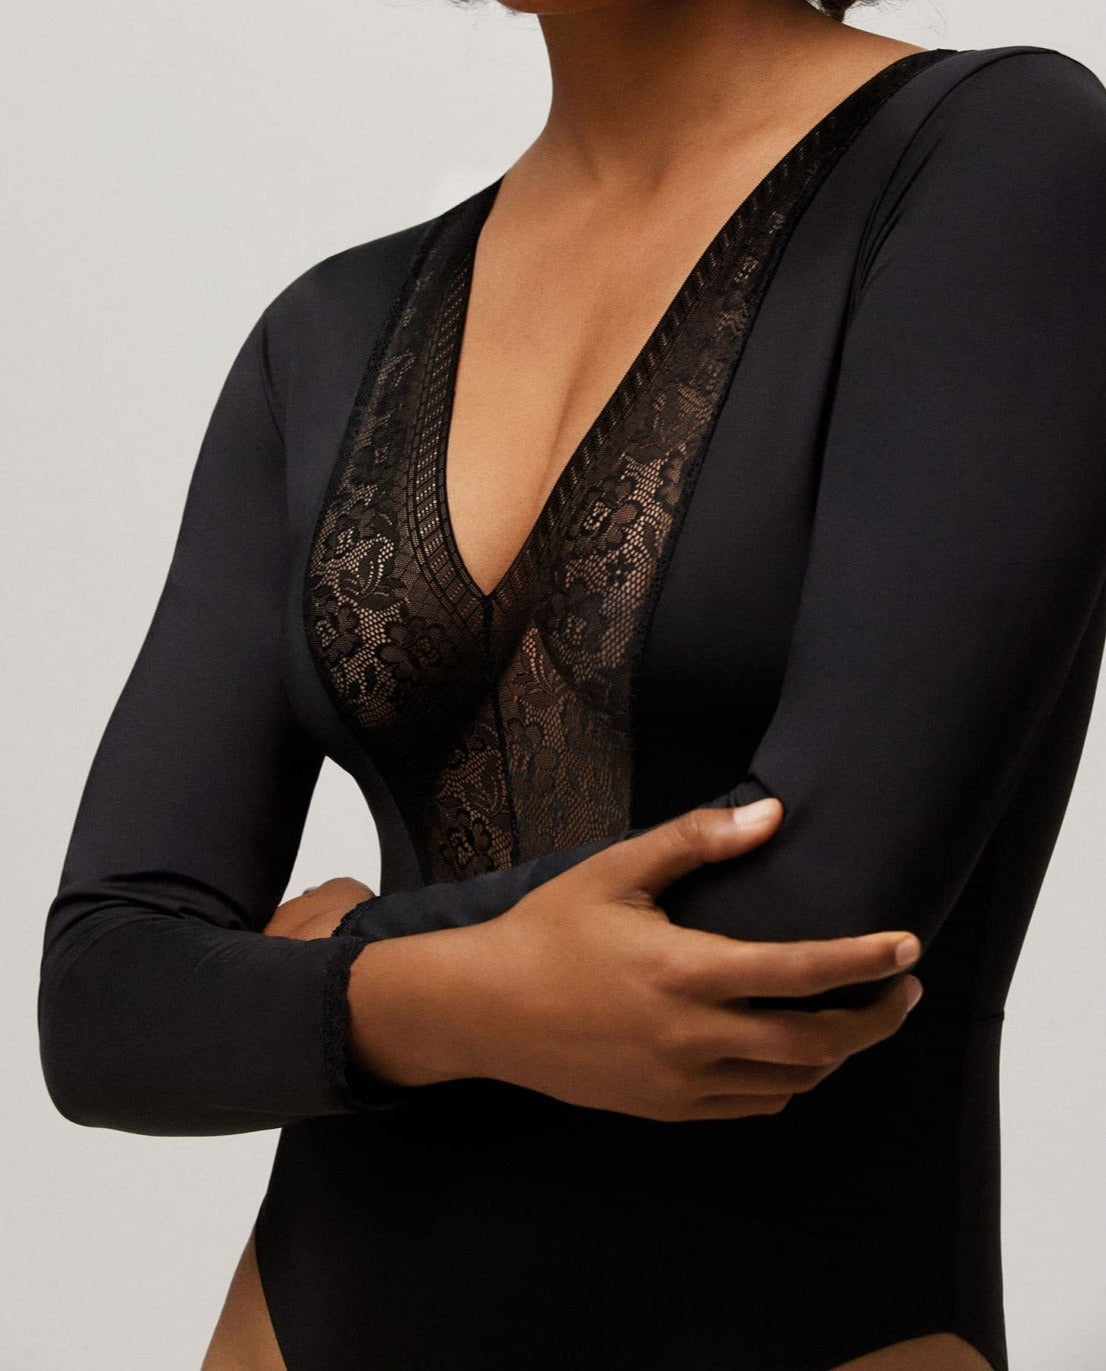 Ysabel Mora 10093 Lace Trim bodysuit - Black long sleeved v-neck body top with a floral lace panelled front, lace cuff trim and two rows of adjustable hook and eye fasteners.